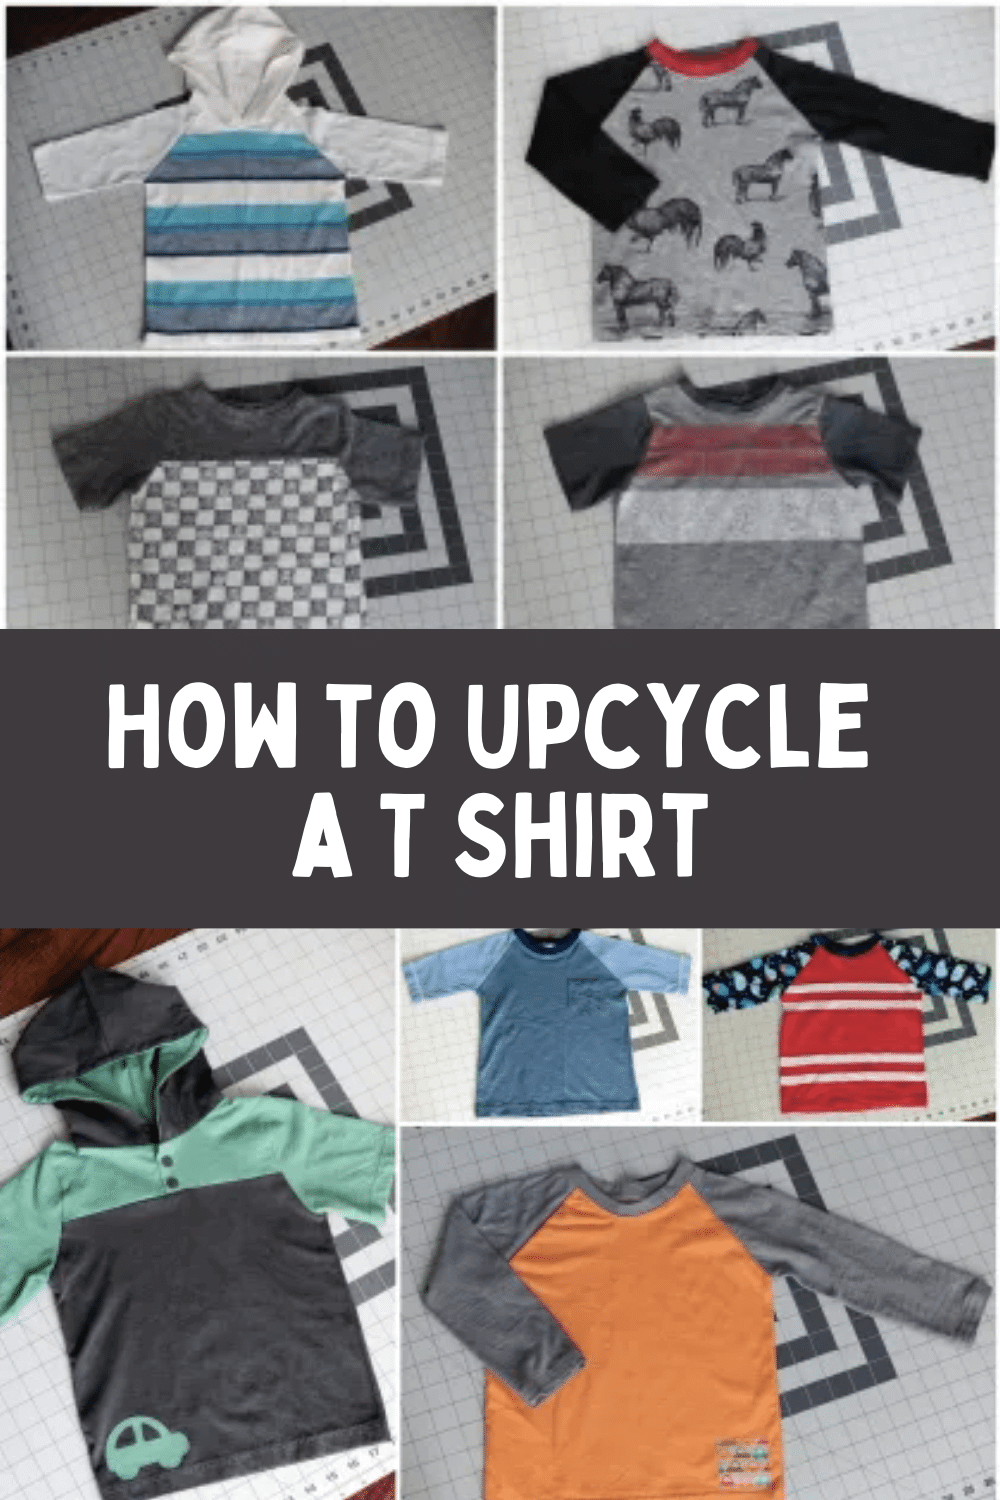 How to Upcycle a T Shirt | Repurpose Your Shirts